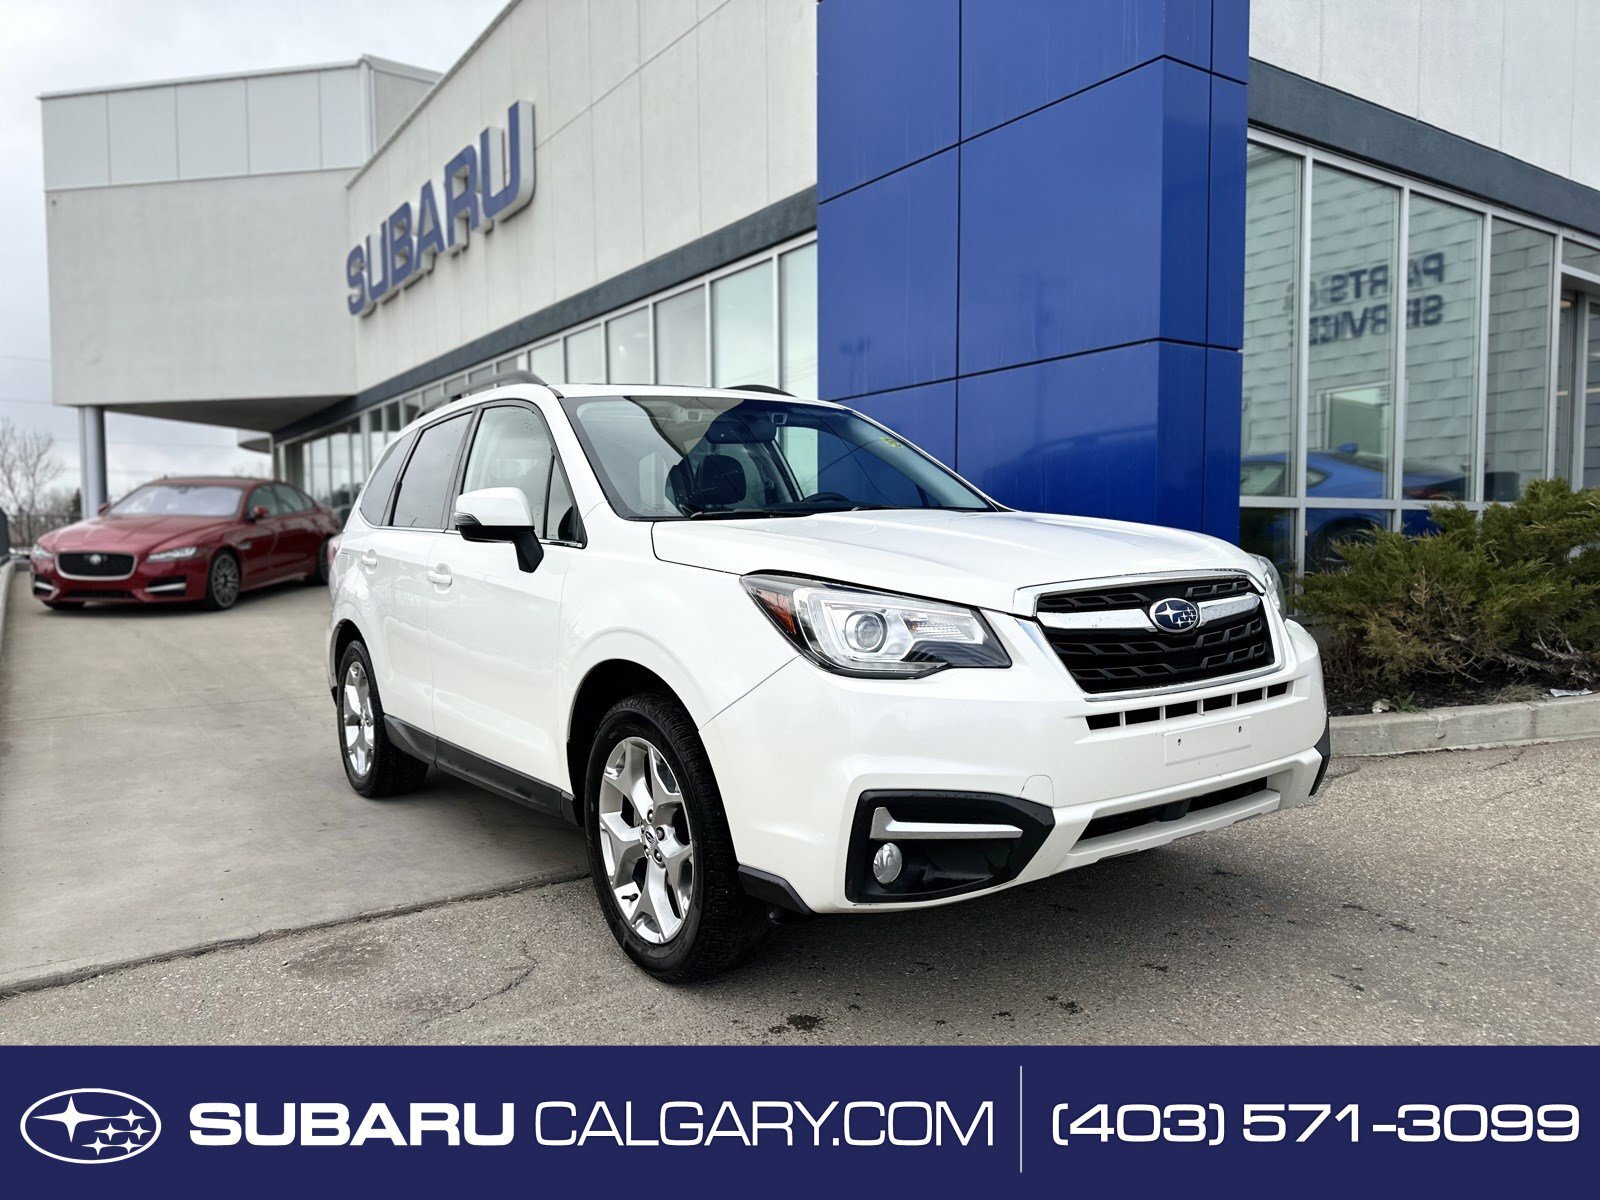 2018 Subaru Forester LIMITED | ULTRA LOW KM'S | HEATED STEERING WHEEL |